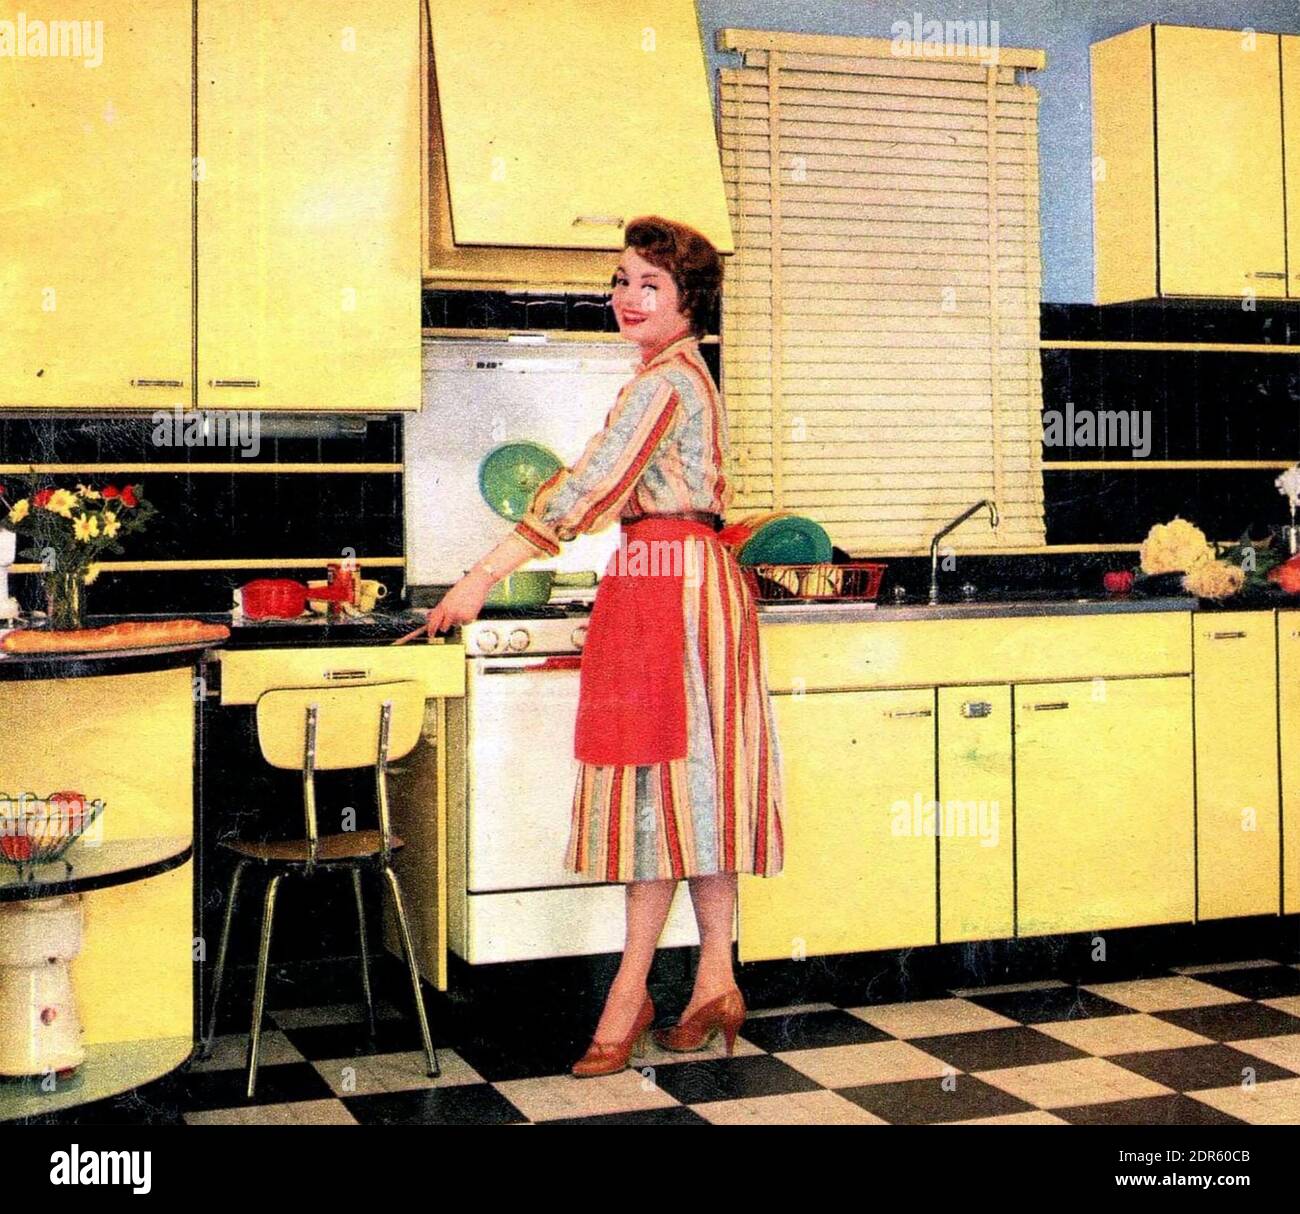 AMERICAN KITCHEN IN 1954 Stock Photo